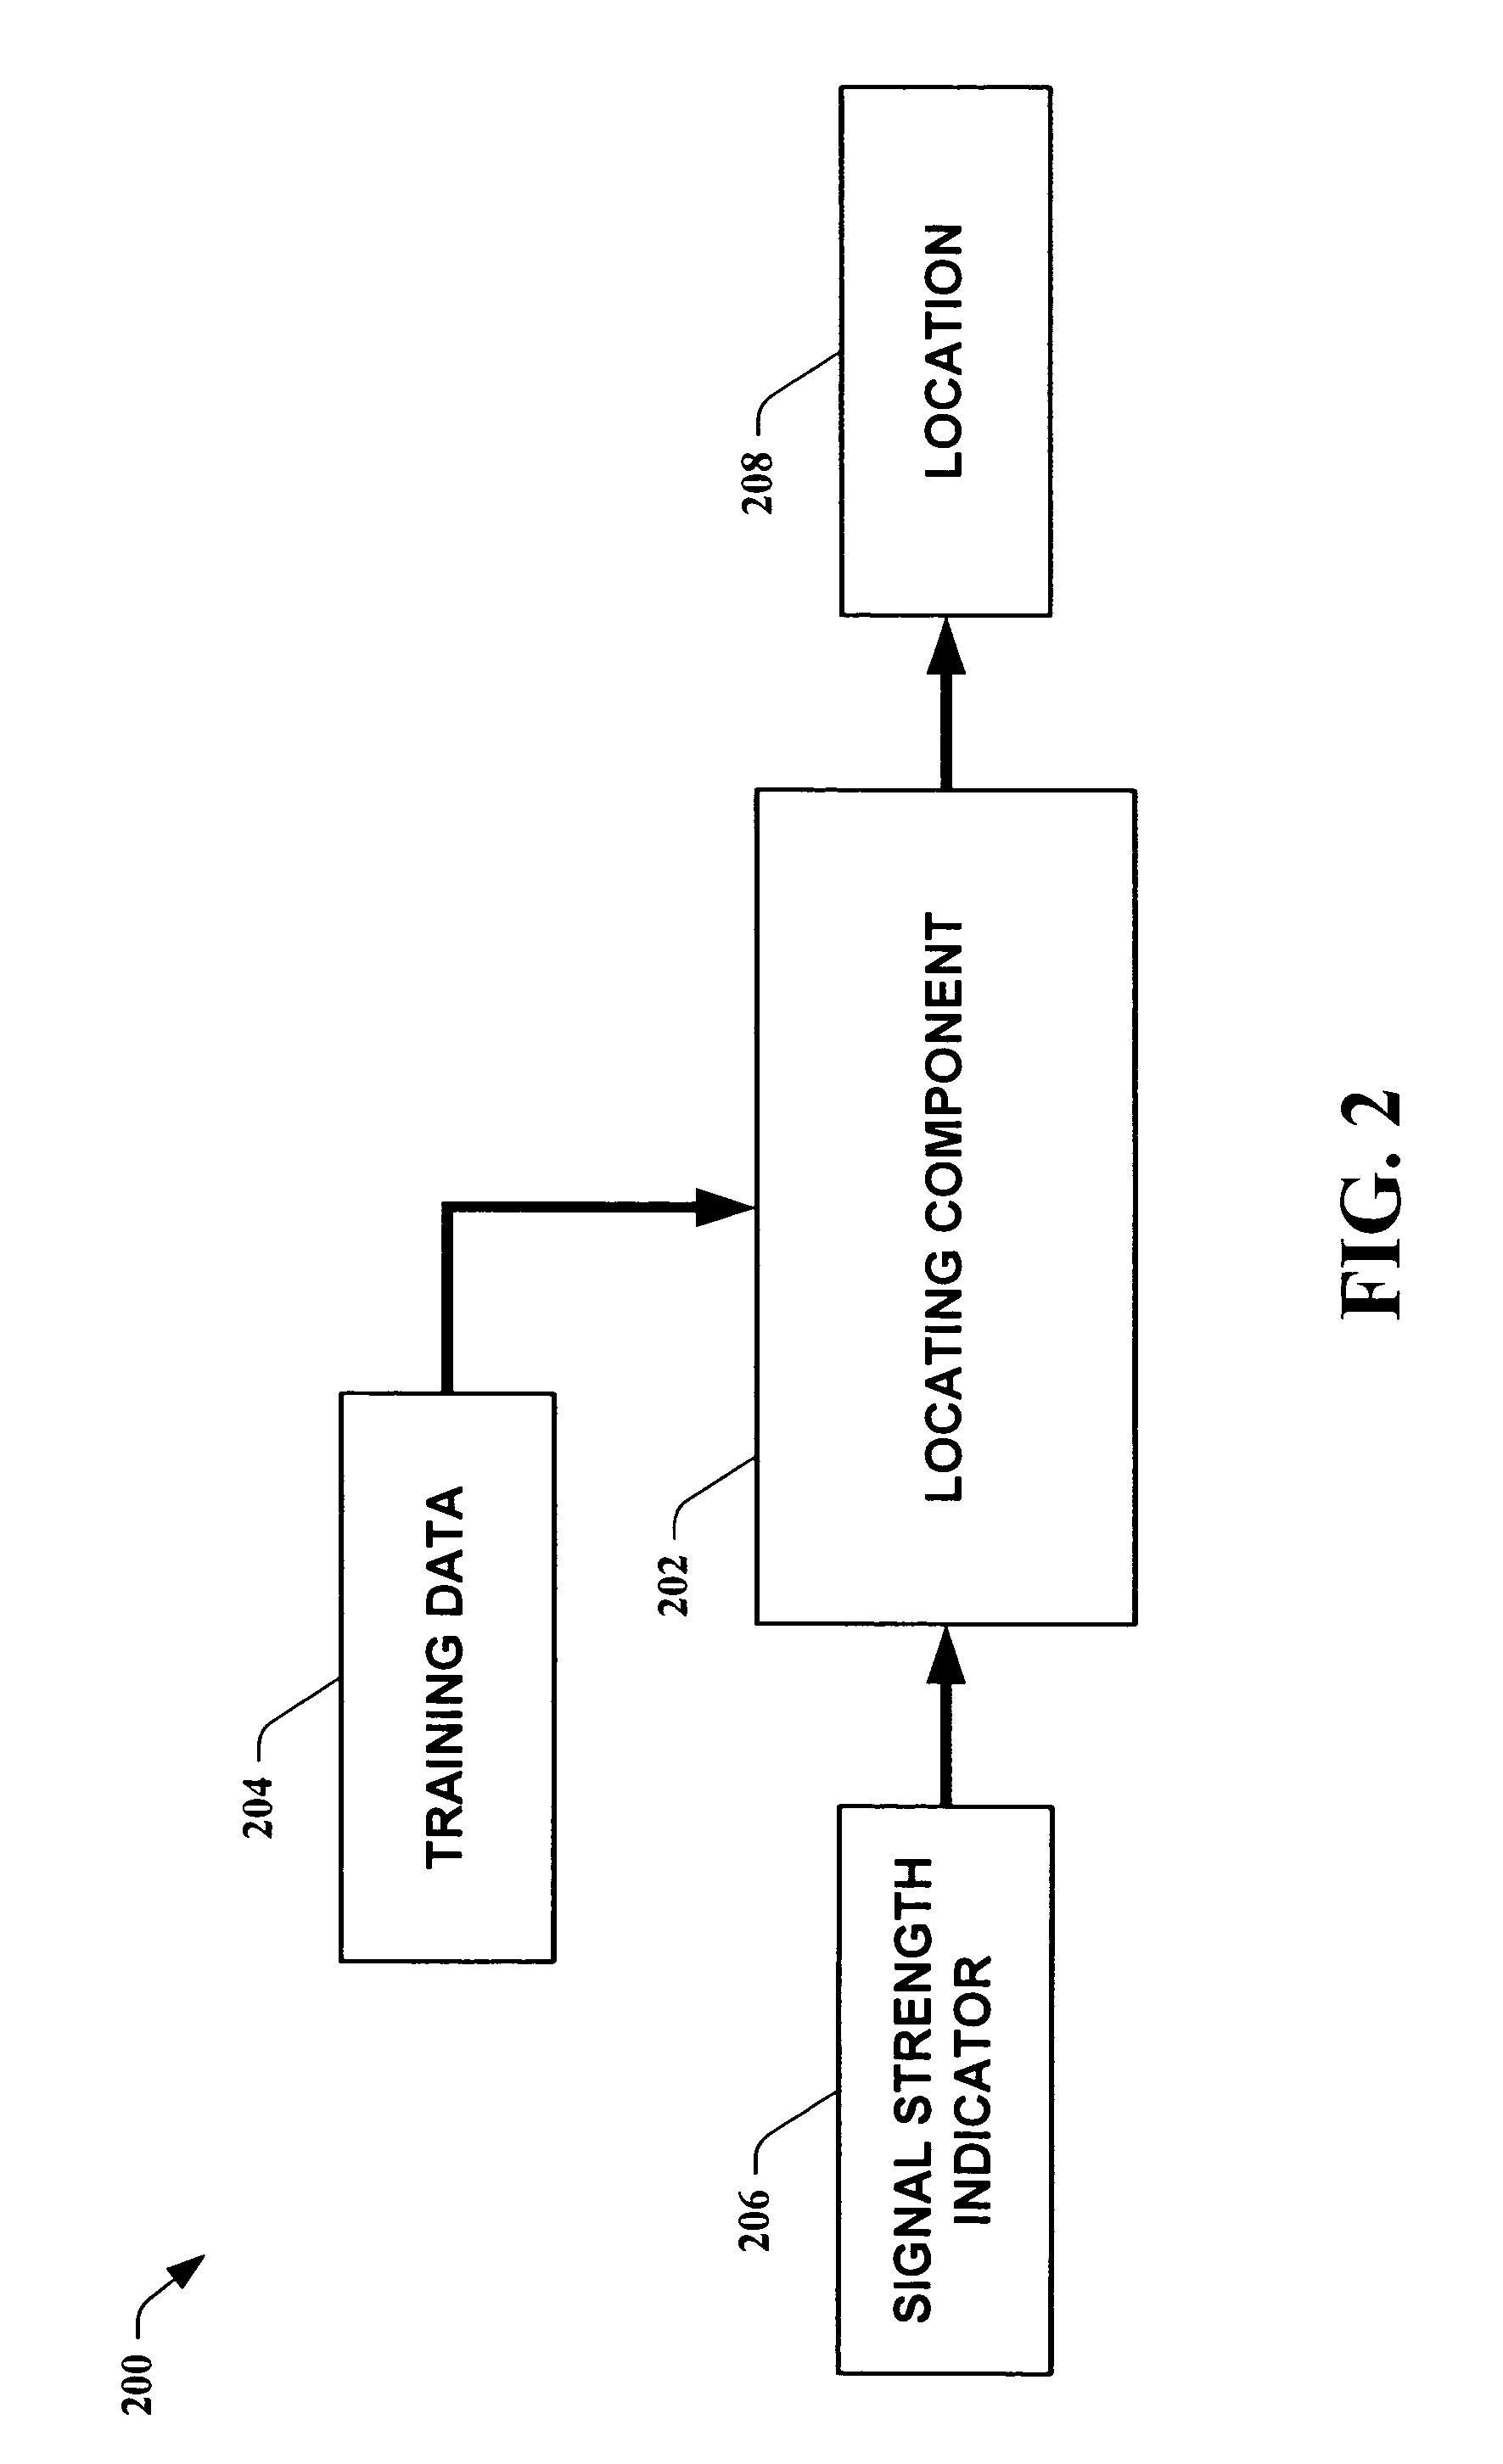 Systems for determining the approximate location of a device from ambient signals